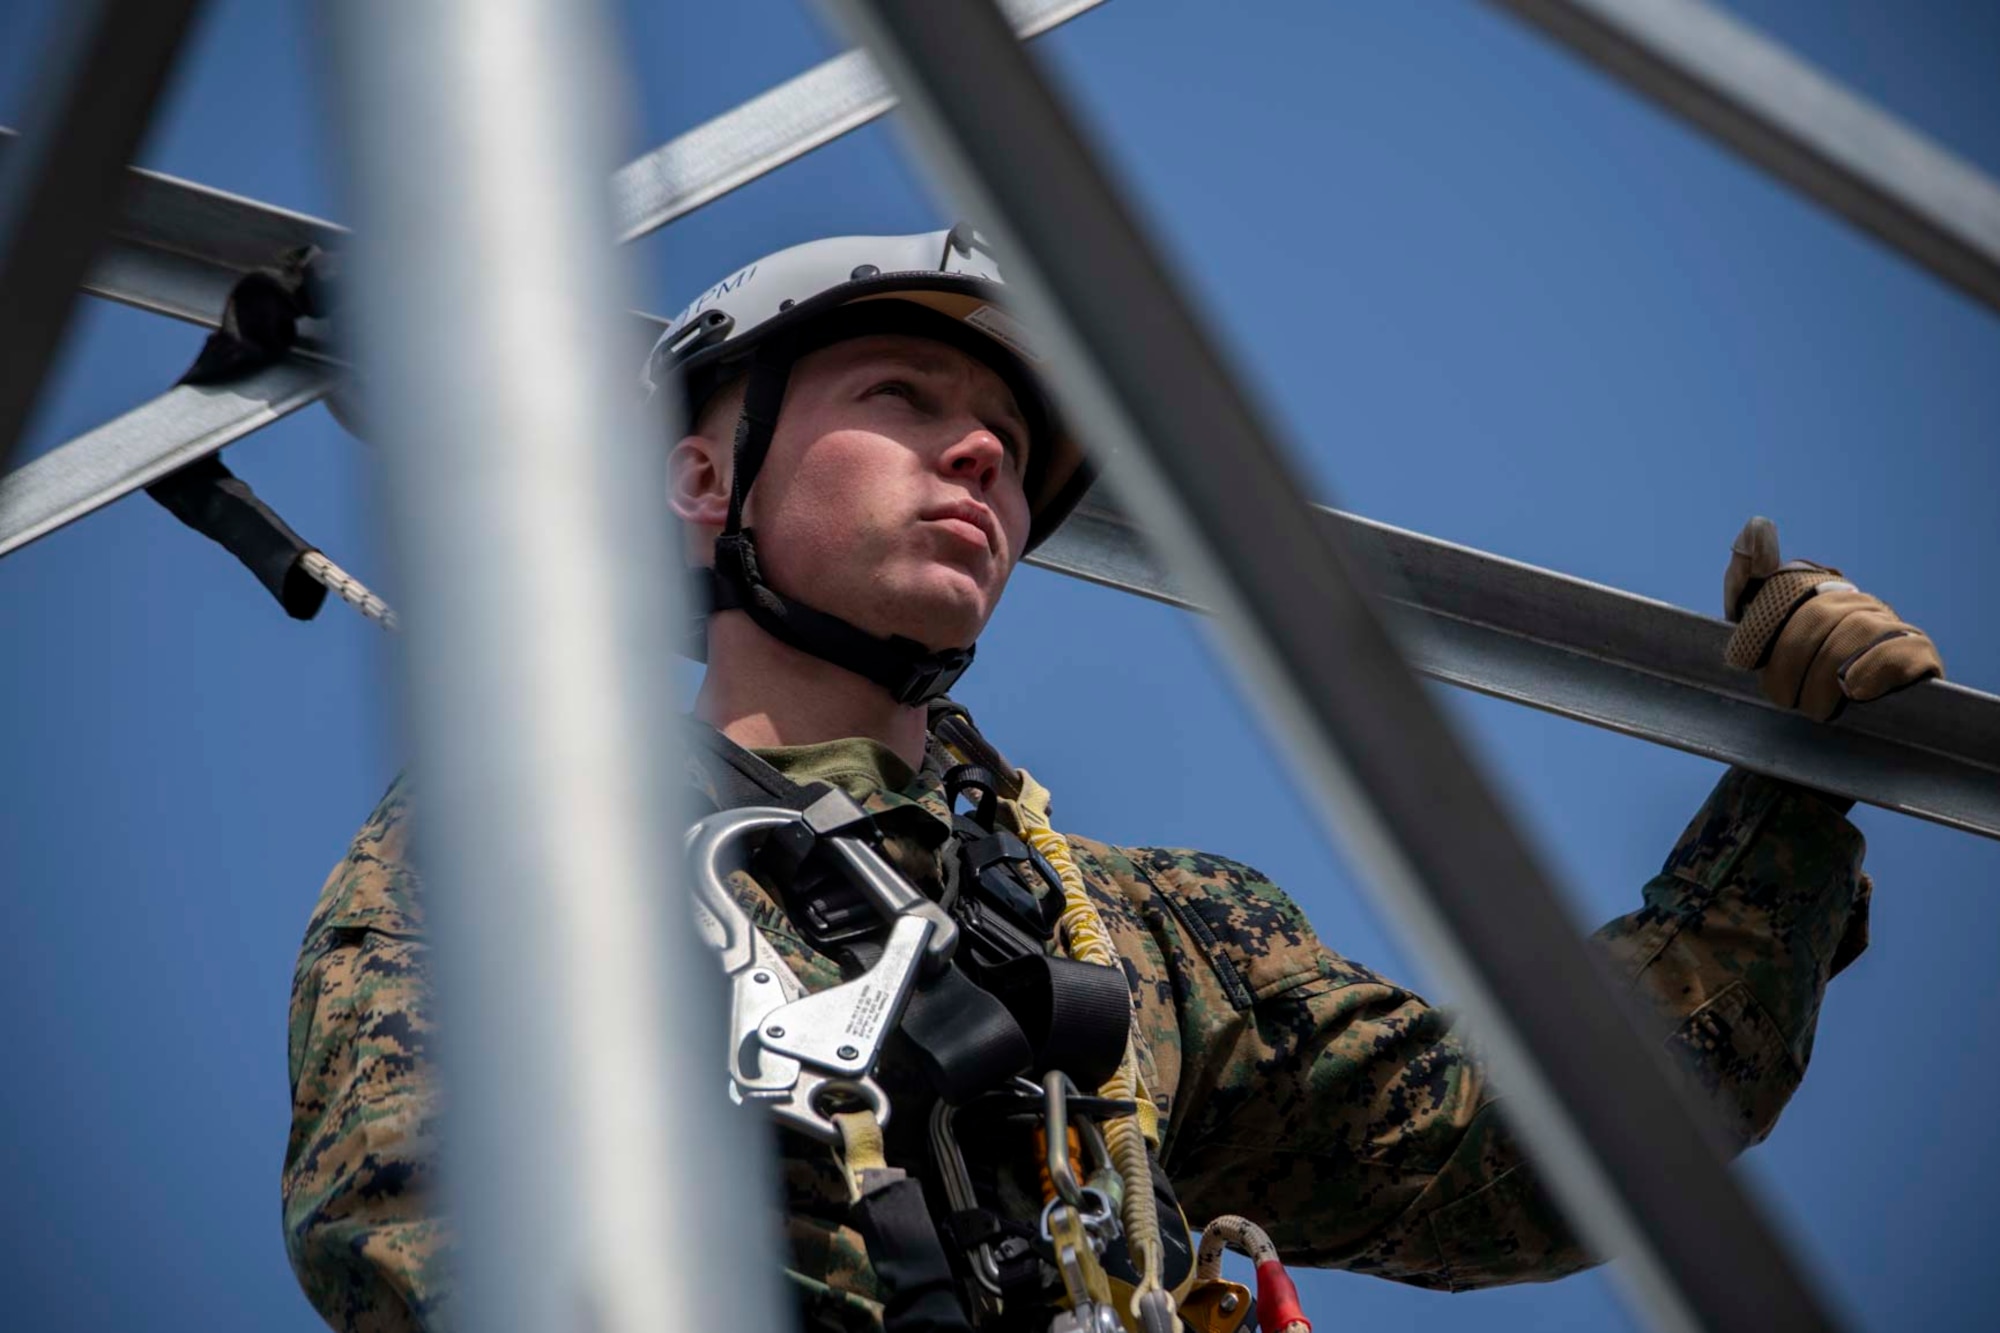 A military member holds on to a metal tower.